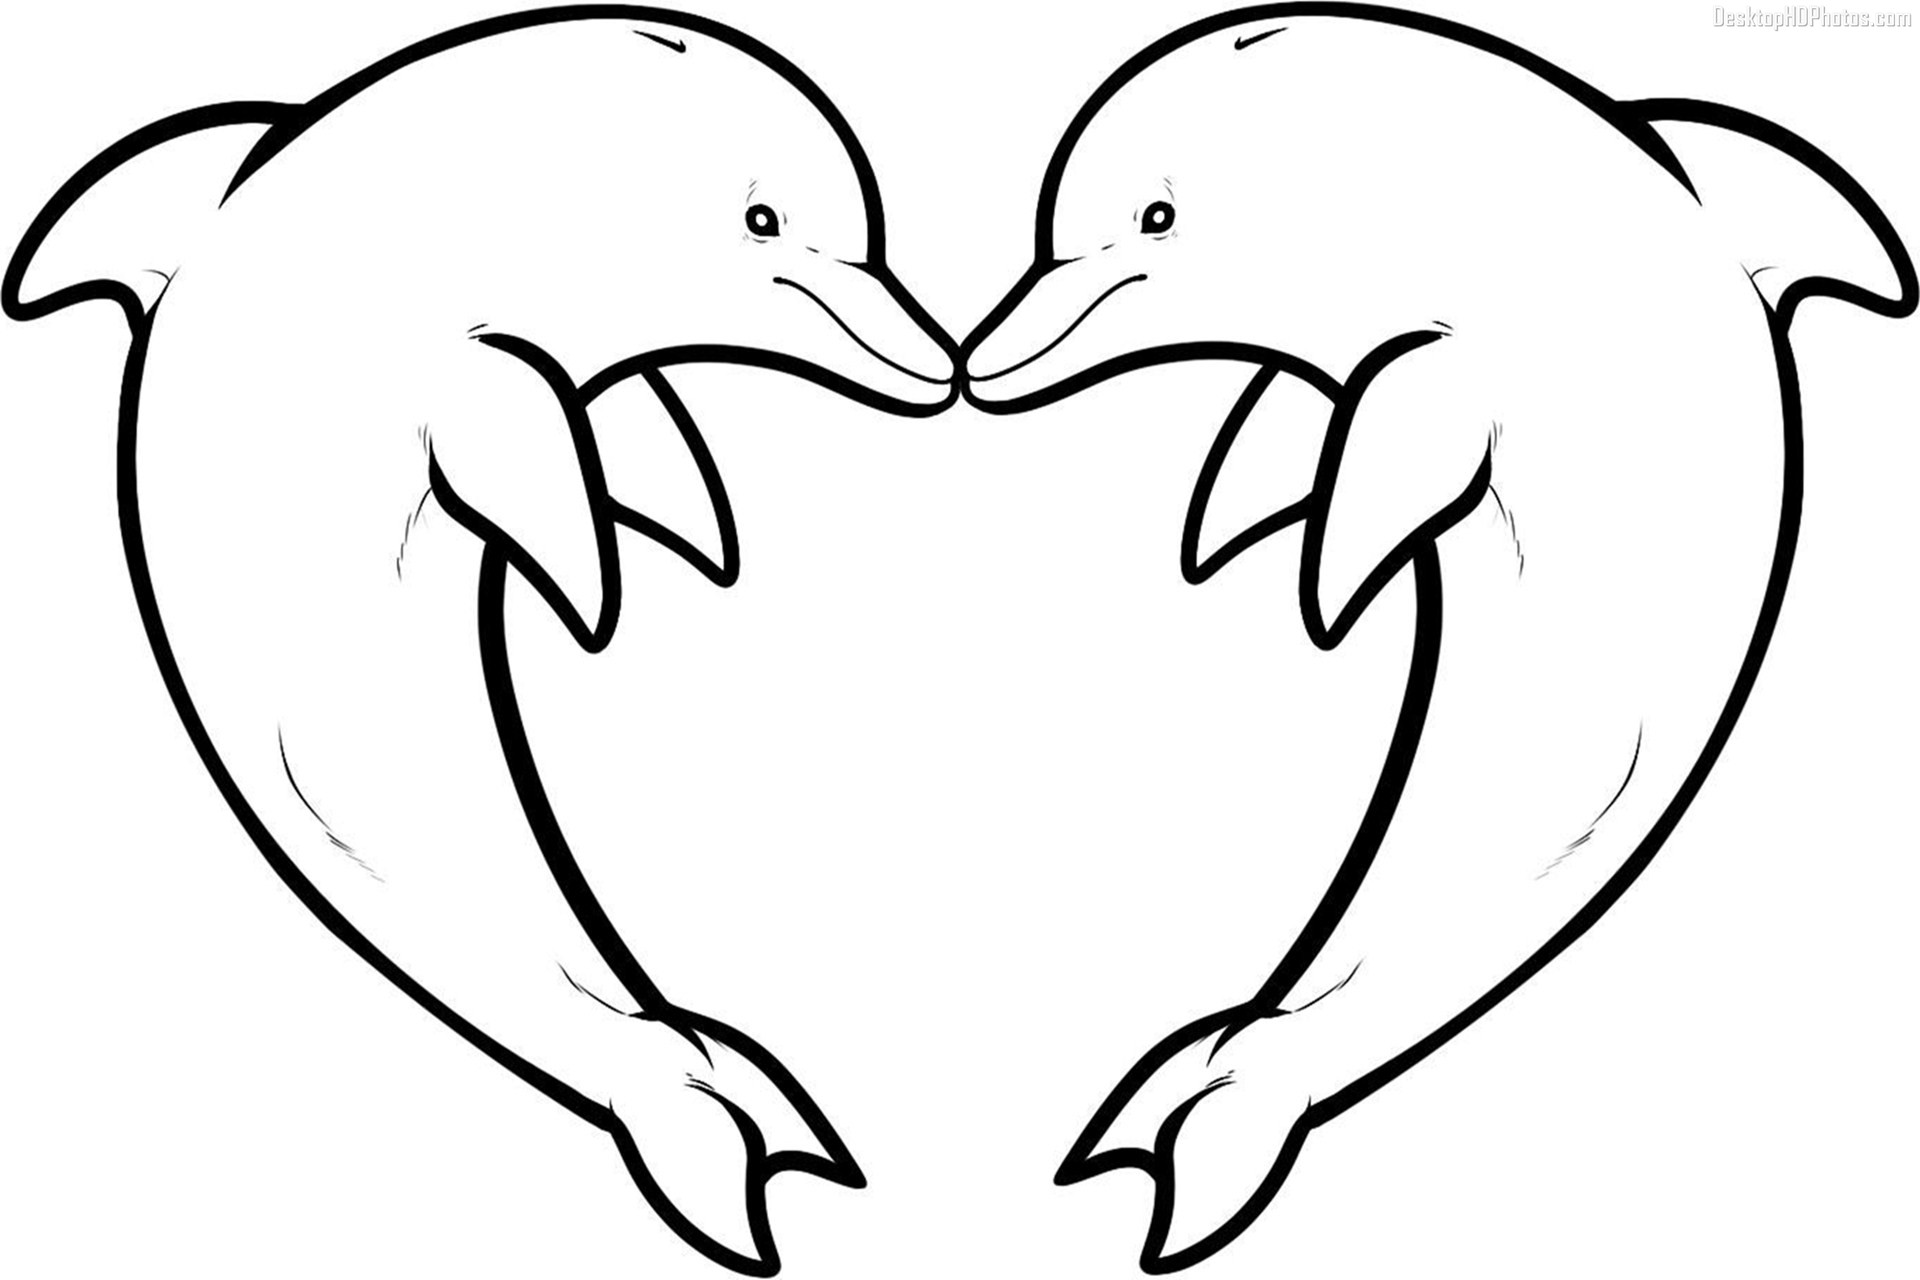 Dolphin Coloring Pages For with HD Resolution 2550x3300 pixels ...